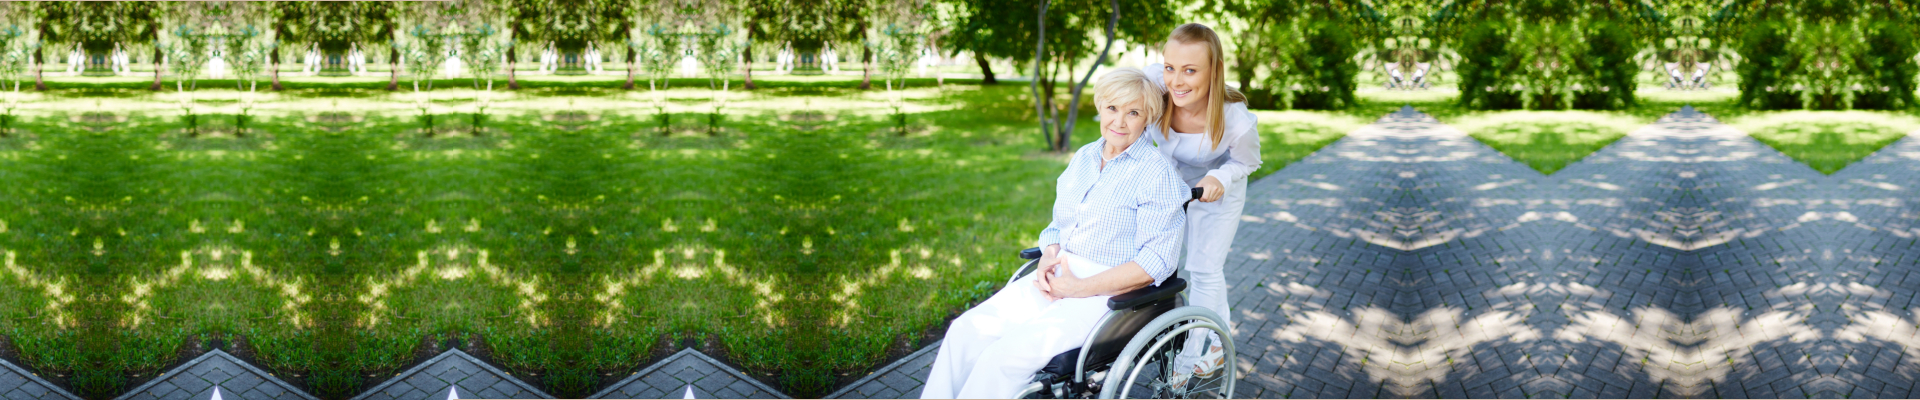 caregiver assisting elderly woman in a wheelchair